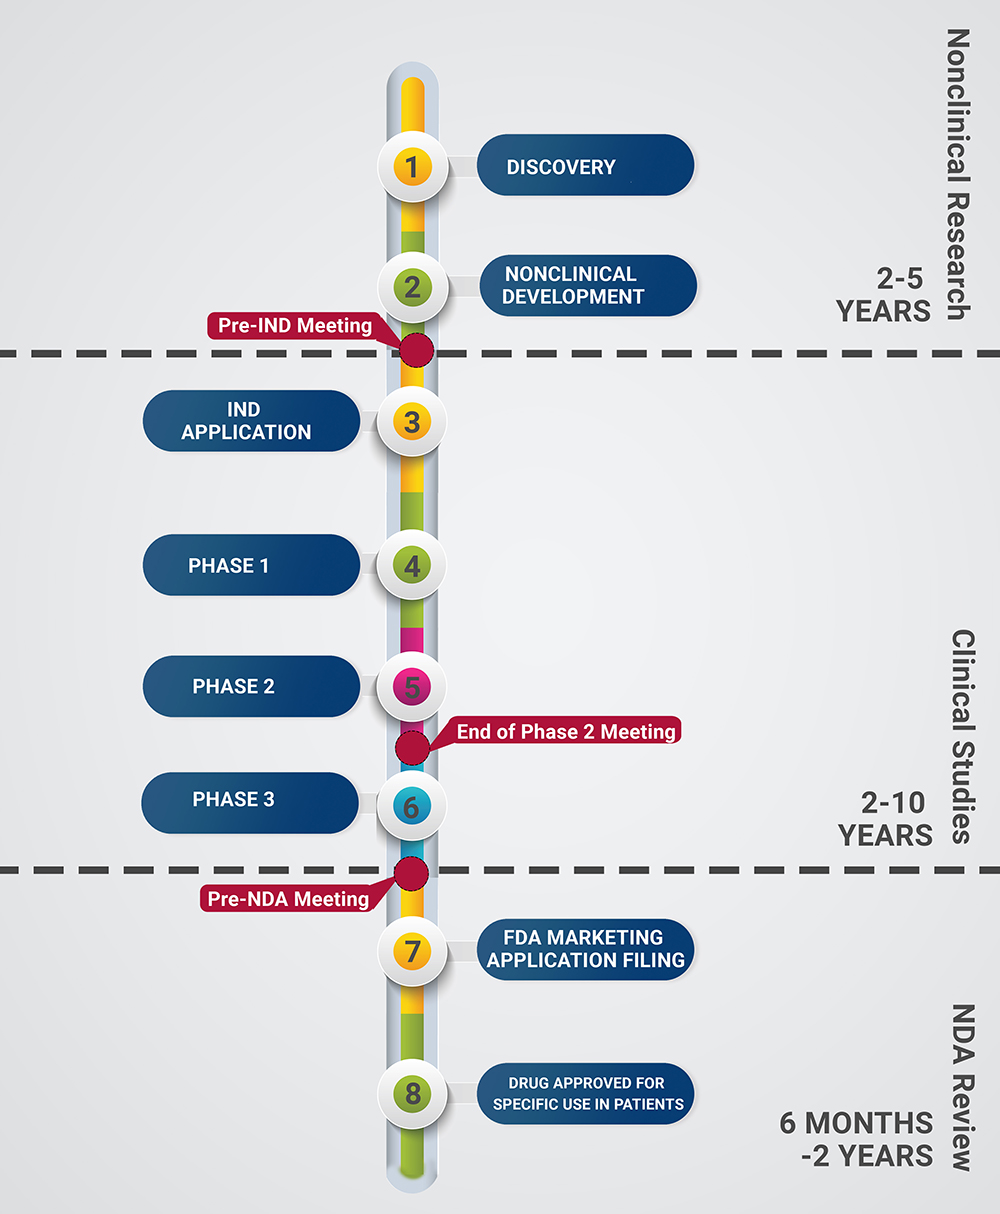 Life Cycle of a New Drug Flowchart, steps 1-7, Nonclinical Research (2-5 Years), Clinical Studies (2-10 Years), and NDA Review (6 Months to 2 Years)